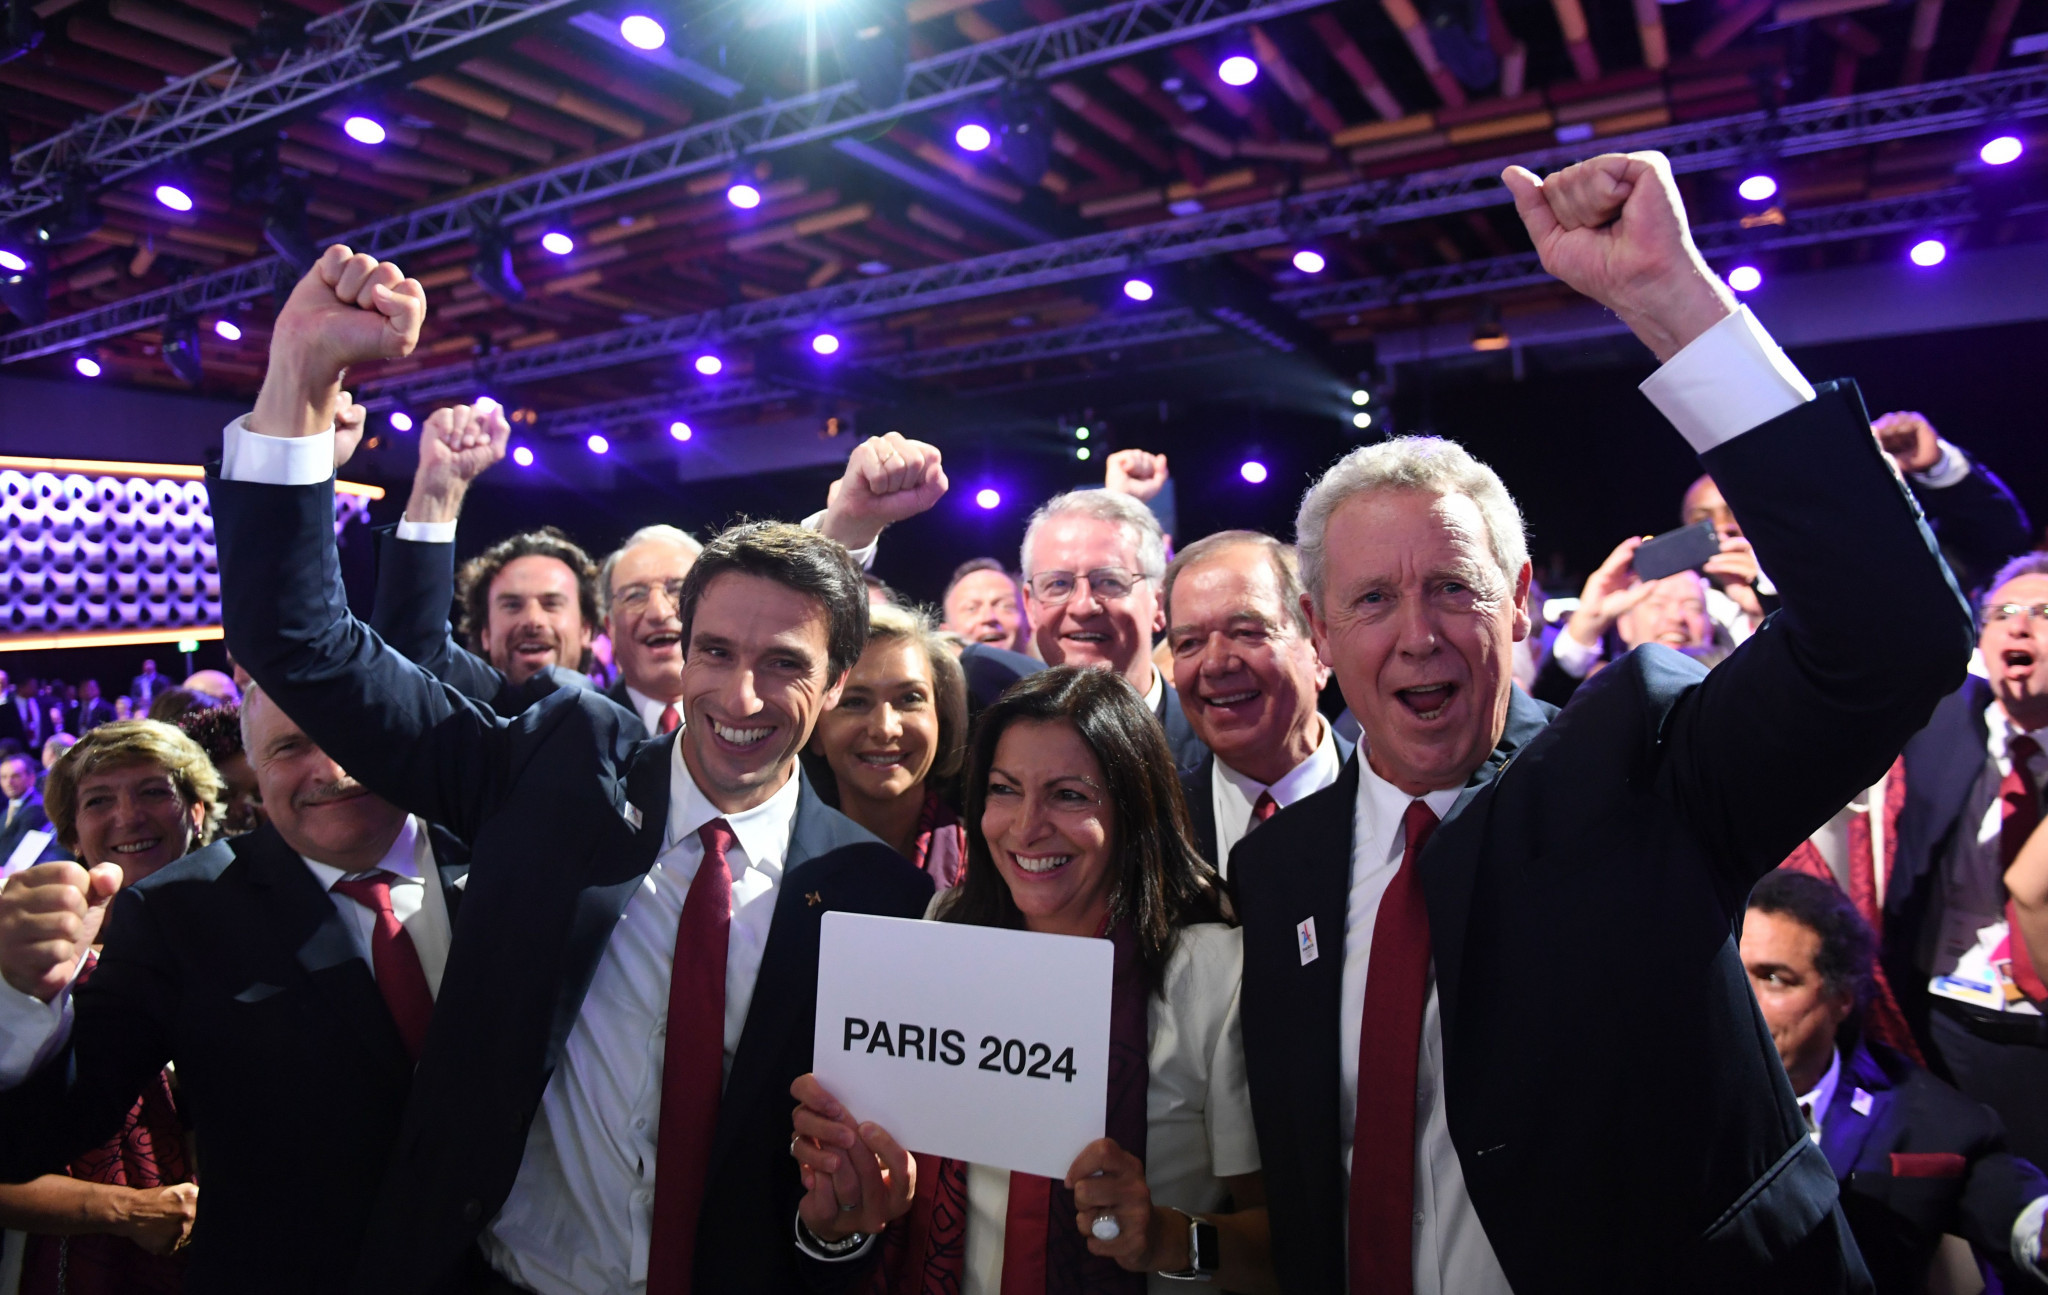 A decision to cut the funding for French sport comes only two weeks after there were celebrations when Paris were awarded the 2024 Olympic and Paralympic Games ©Getty Images